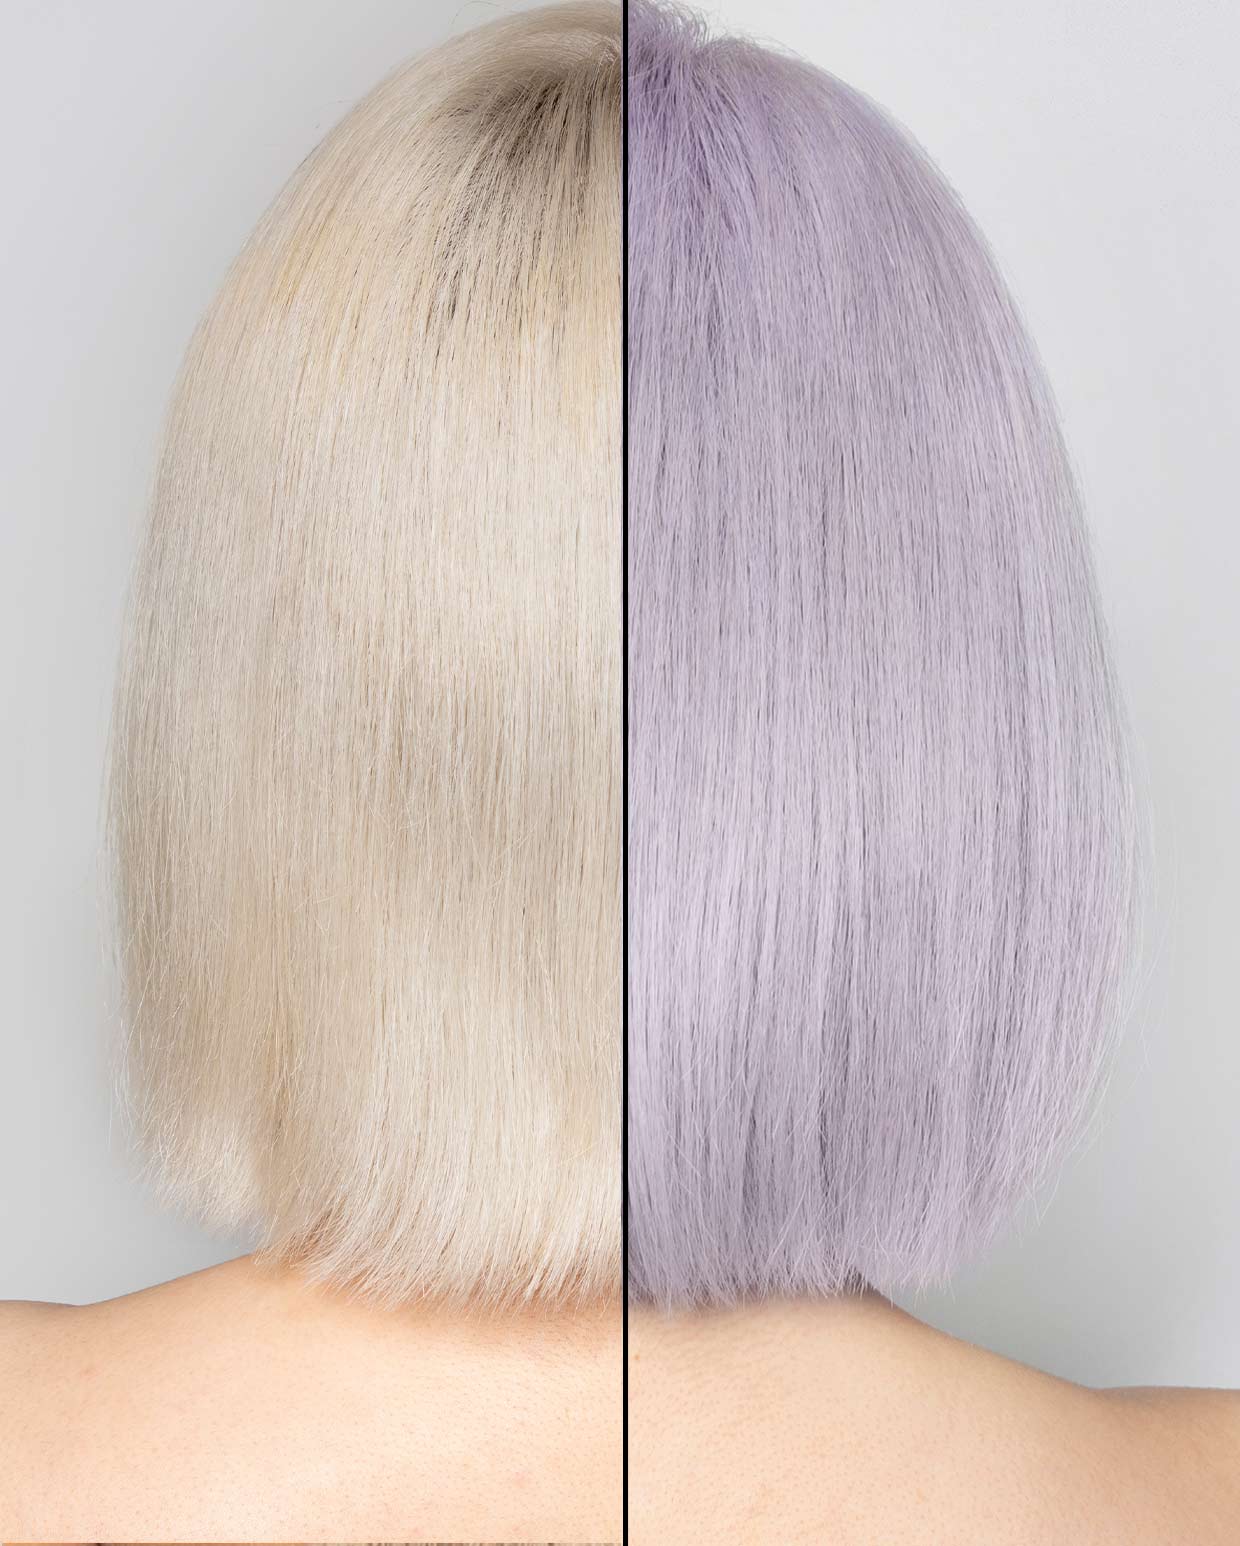 Model showing the before and after of the Shrine Drop it Lilac Toner